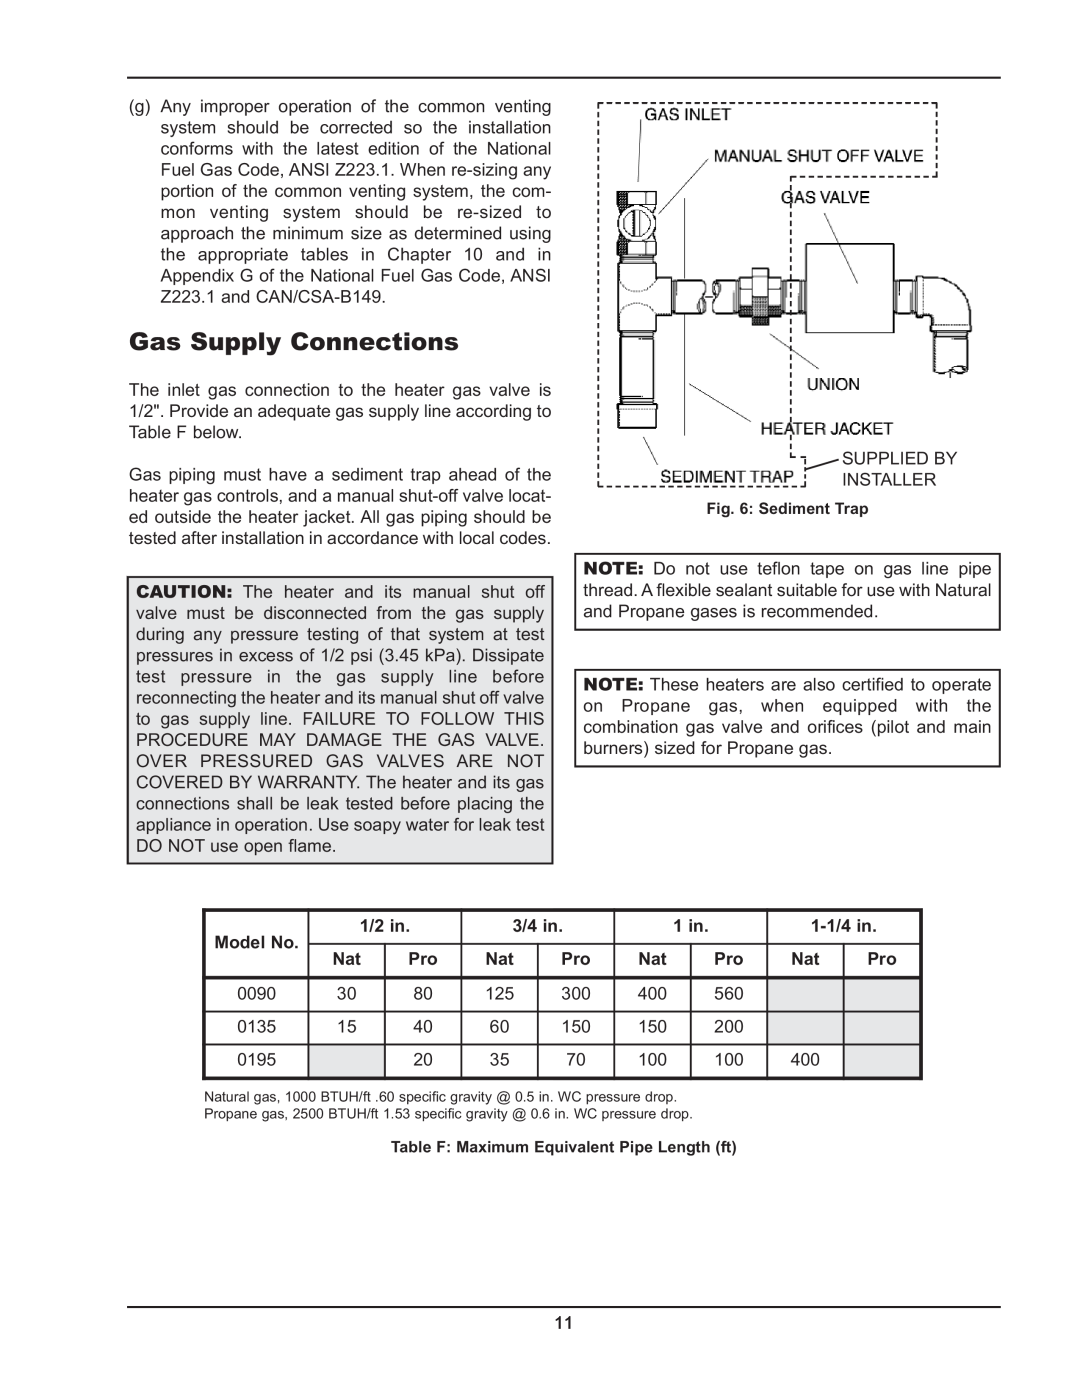 Raypak 0090A, 0195A, 0135A operating instructions Gas Supply Connections, Model No, 1/2 in, 3/4 in, 1 in, 1-1/4in 